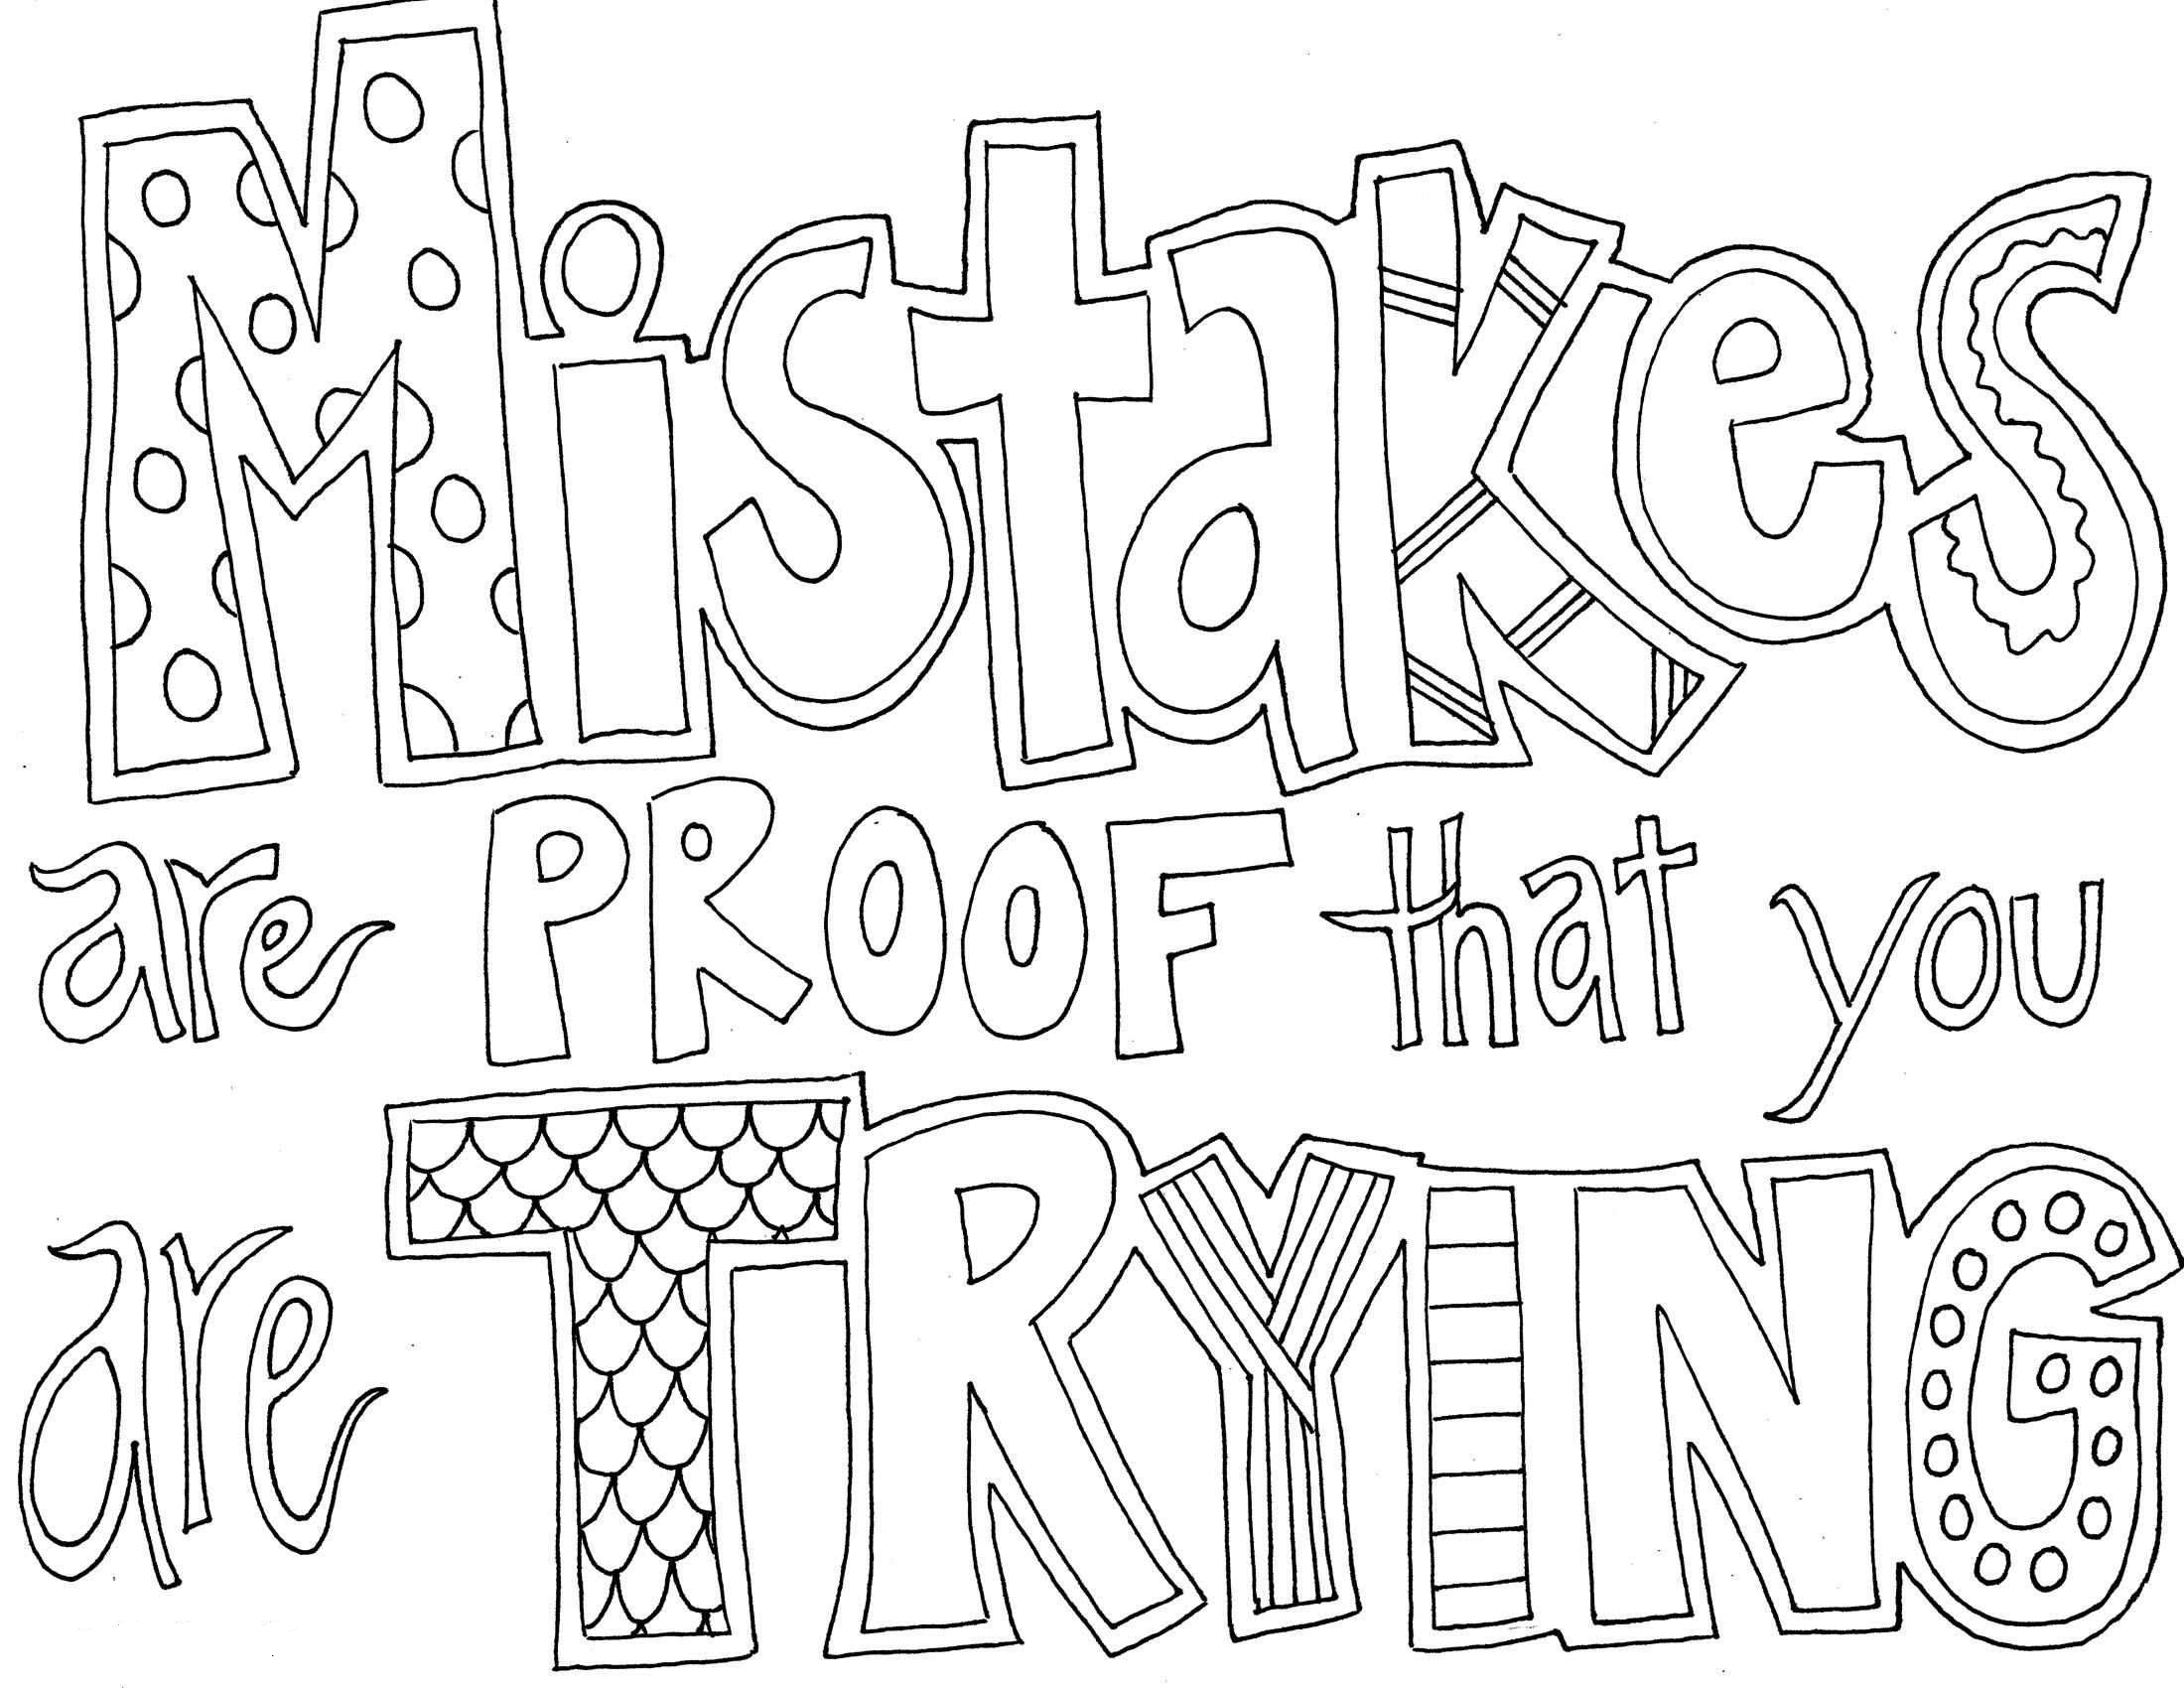 Quote and Sayings Coloring Pages | Activity Shelter